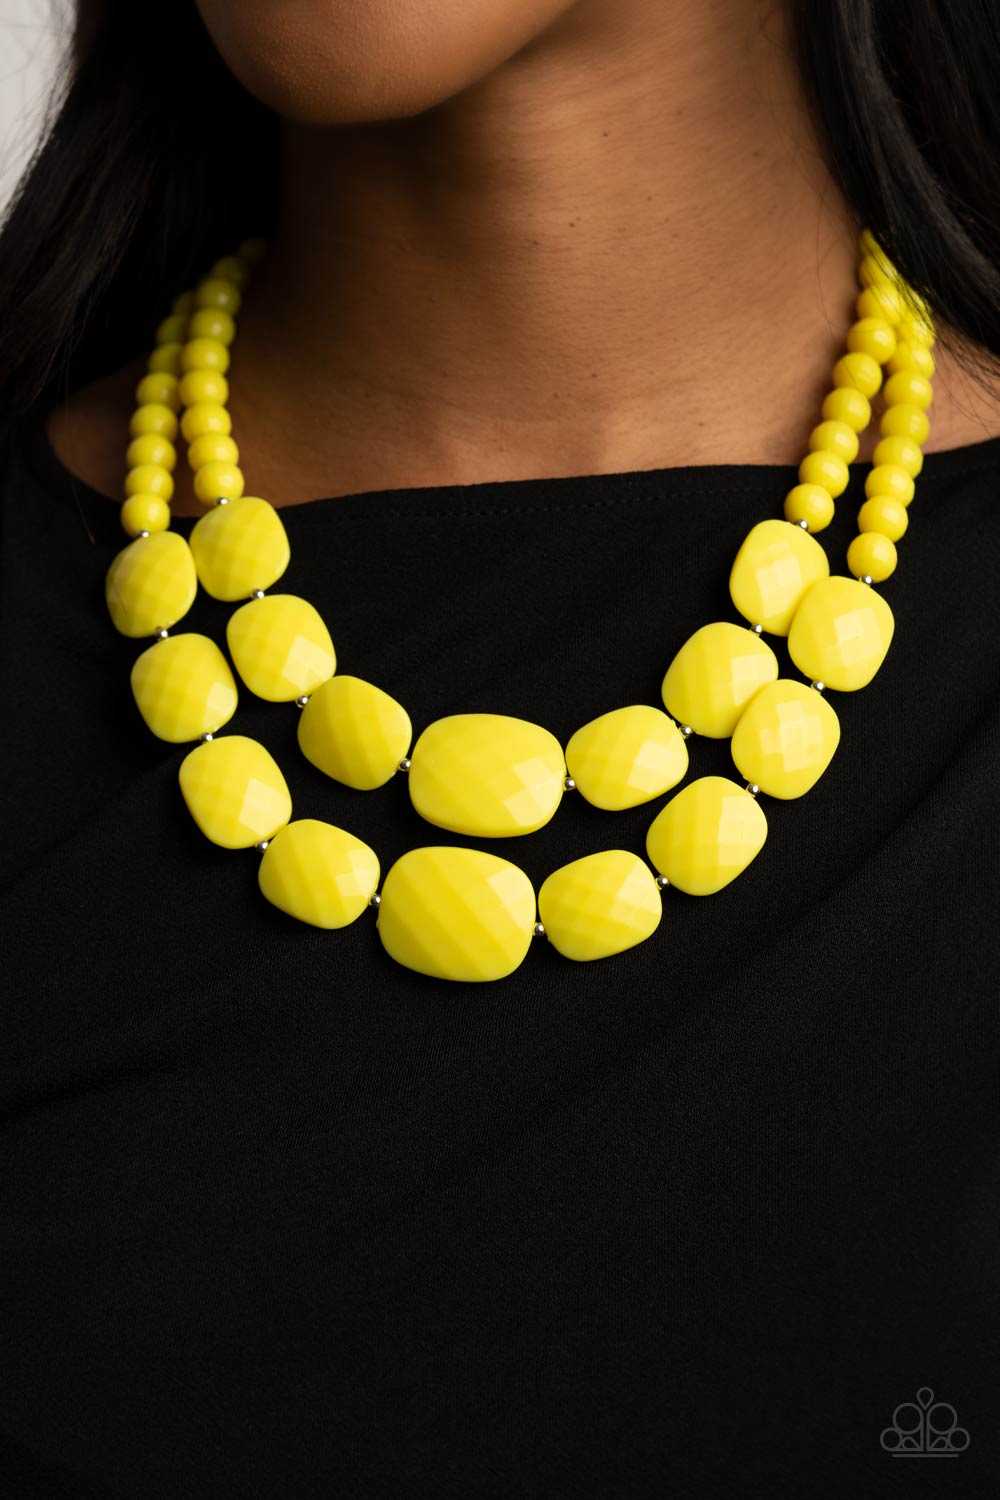 Paparazzi Accessories - Resort Ready #N645 - Yellow Necklace